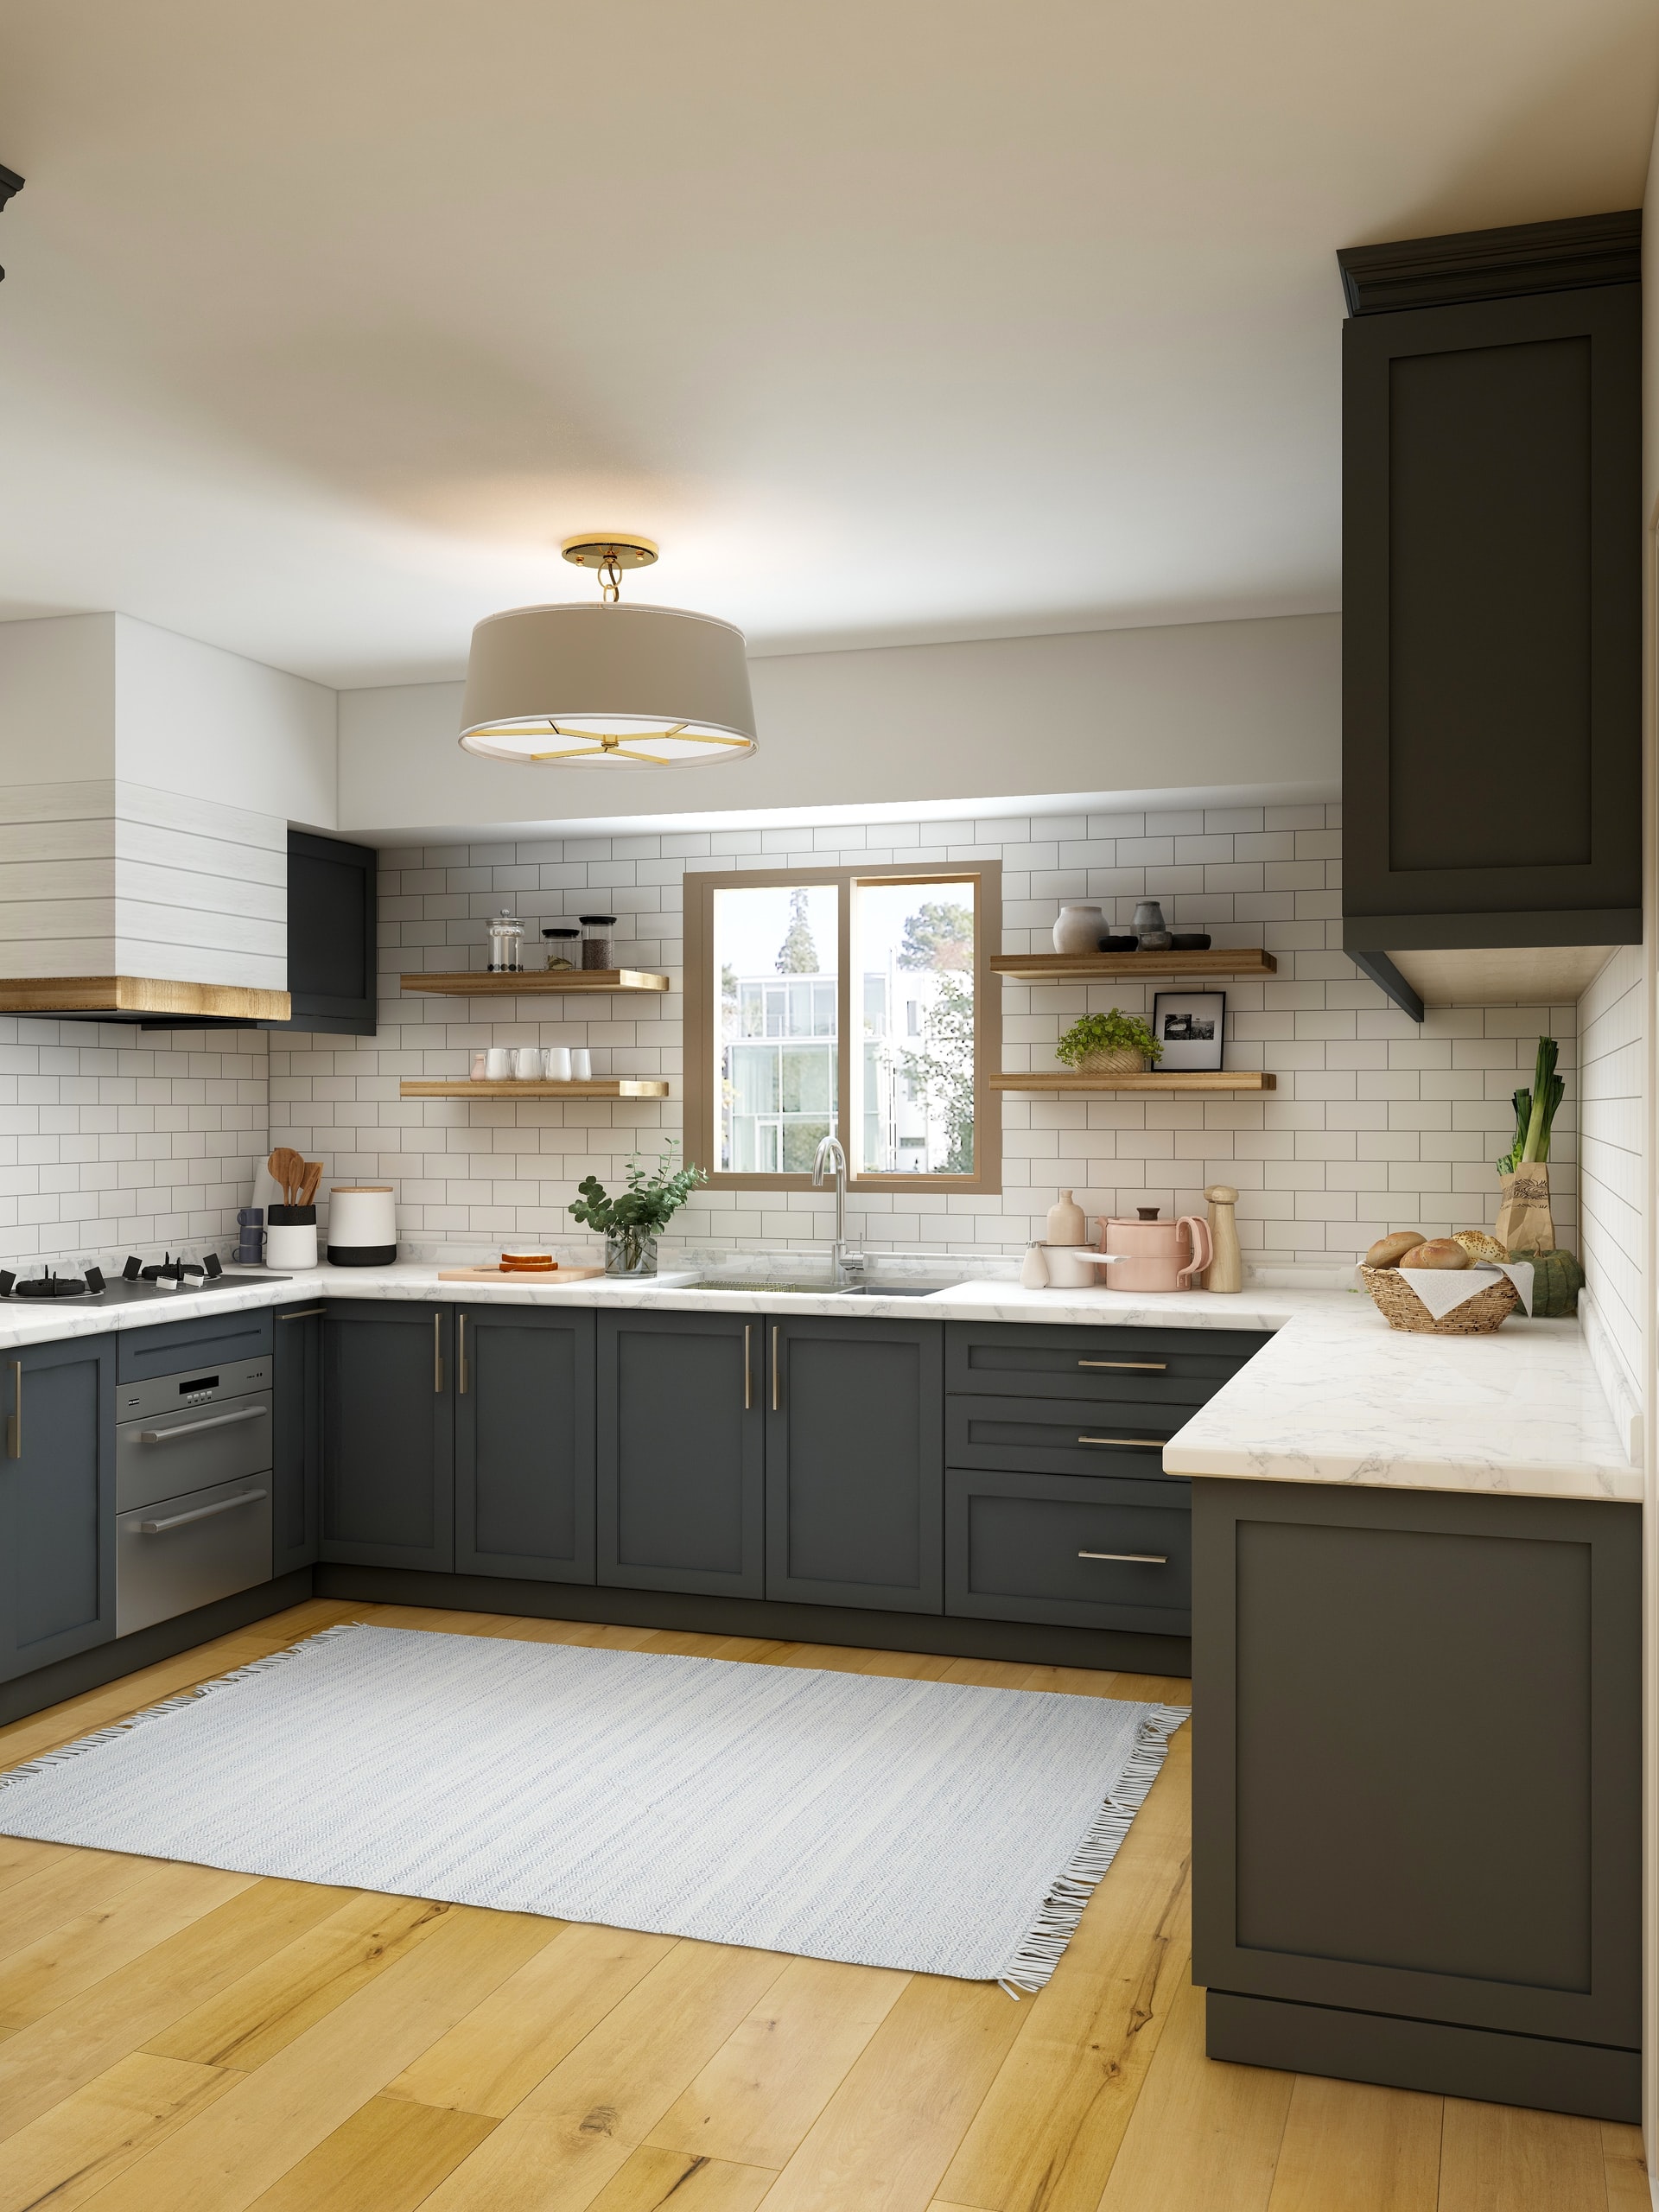 A kitchen with matte cupboards